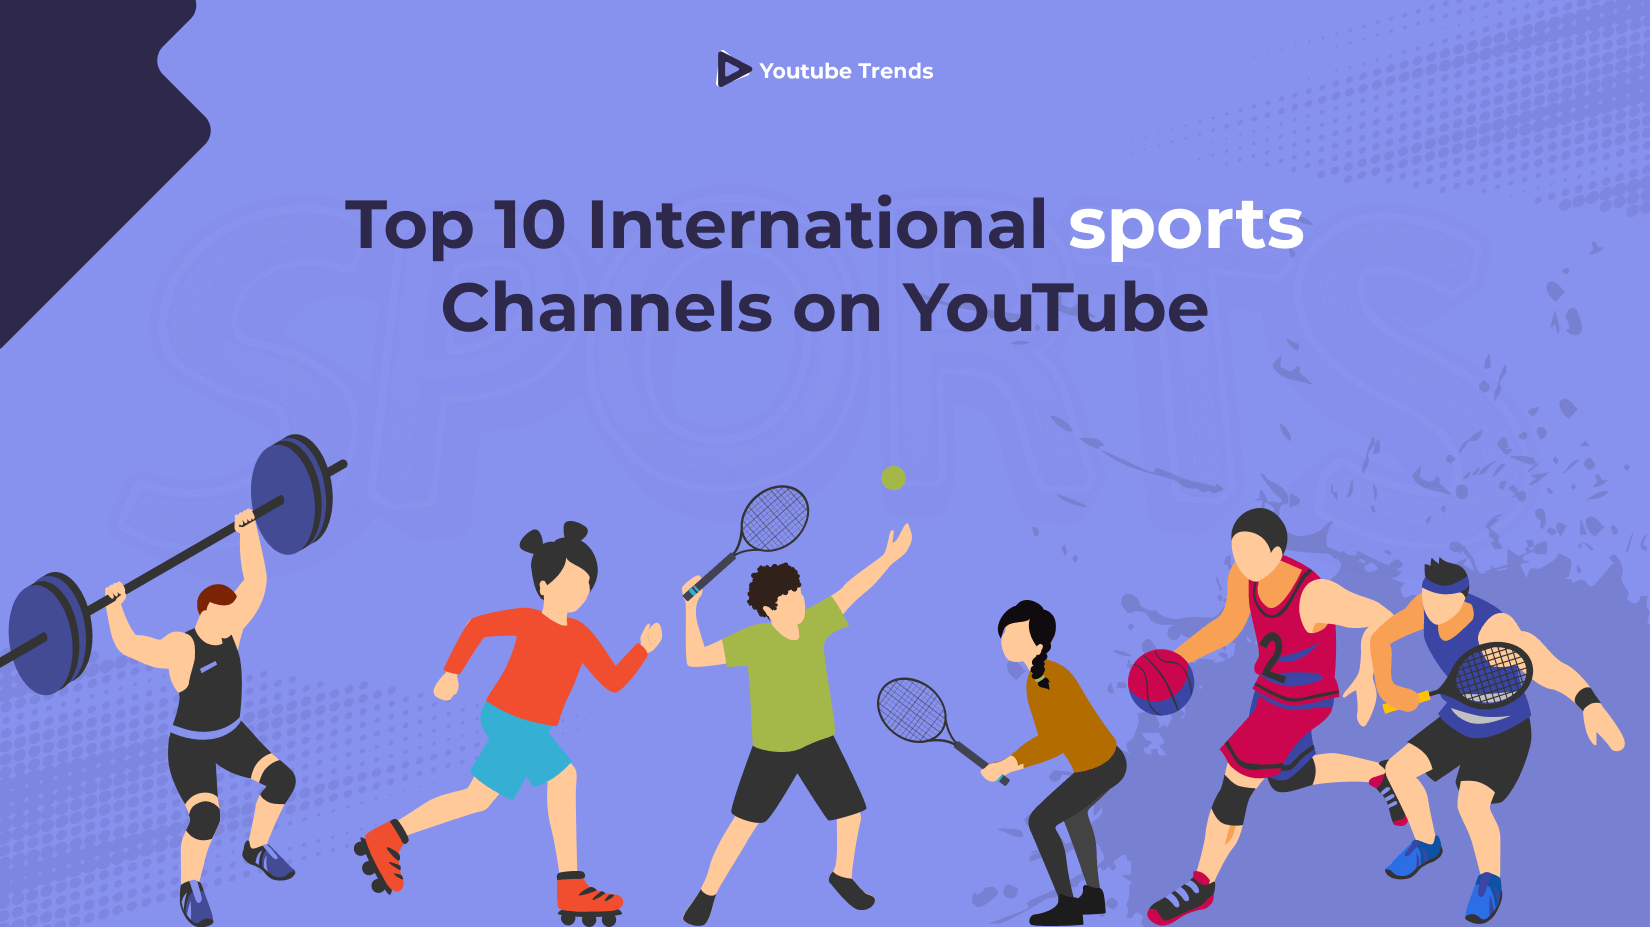 list of Top 10 International Sports News Channels on YouTube